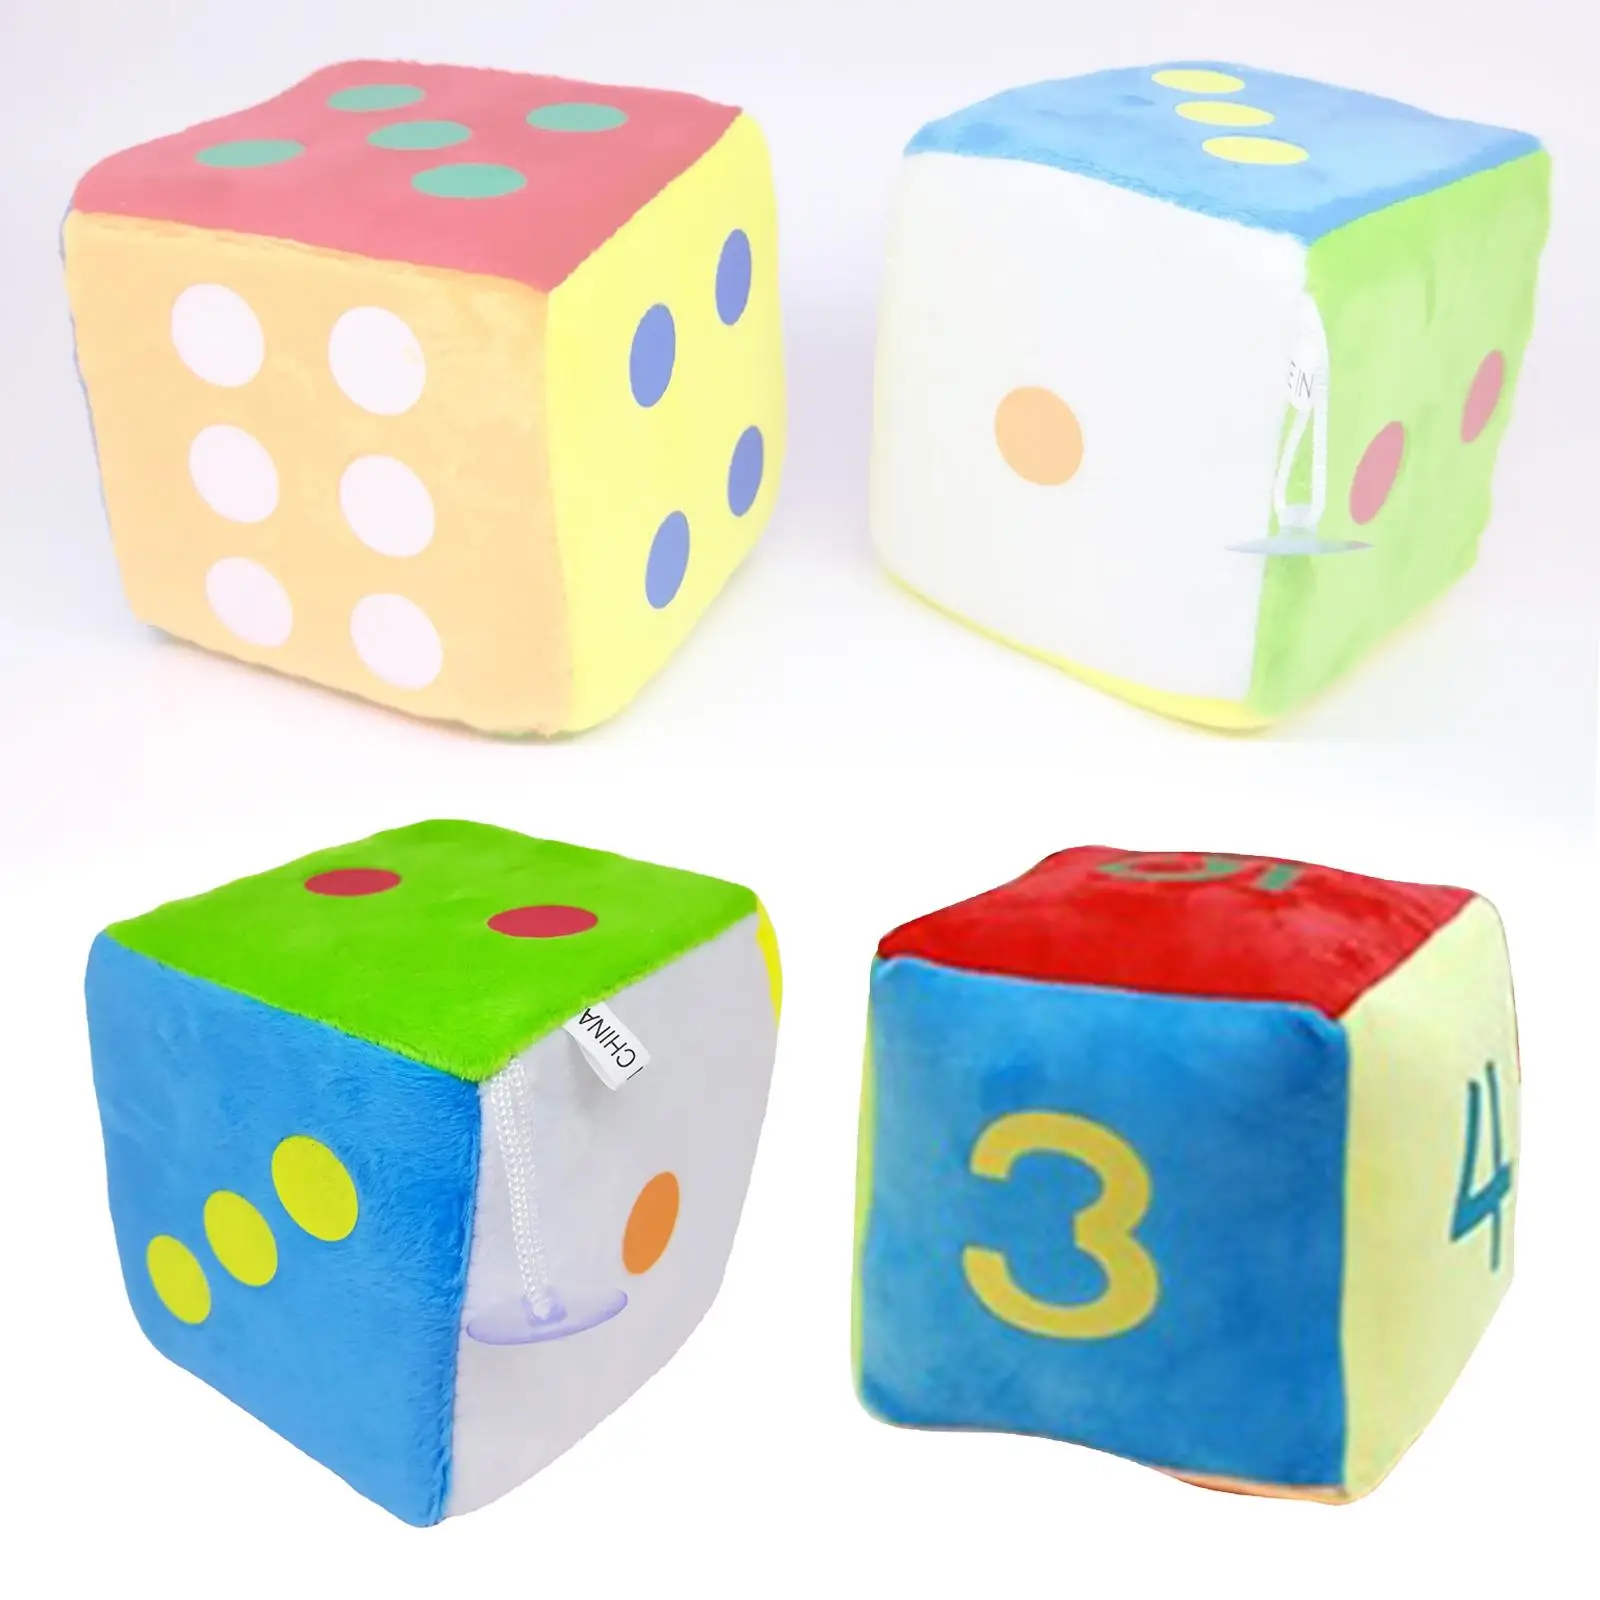 6 Pieces Hanging Plush Dice Decoration Early Education Toy Enlightenment Learning Dice for Parent Child Interactive Game  Games